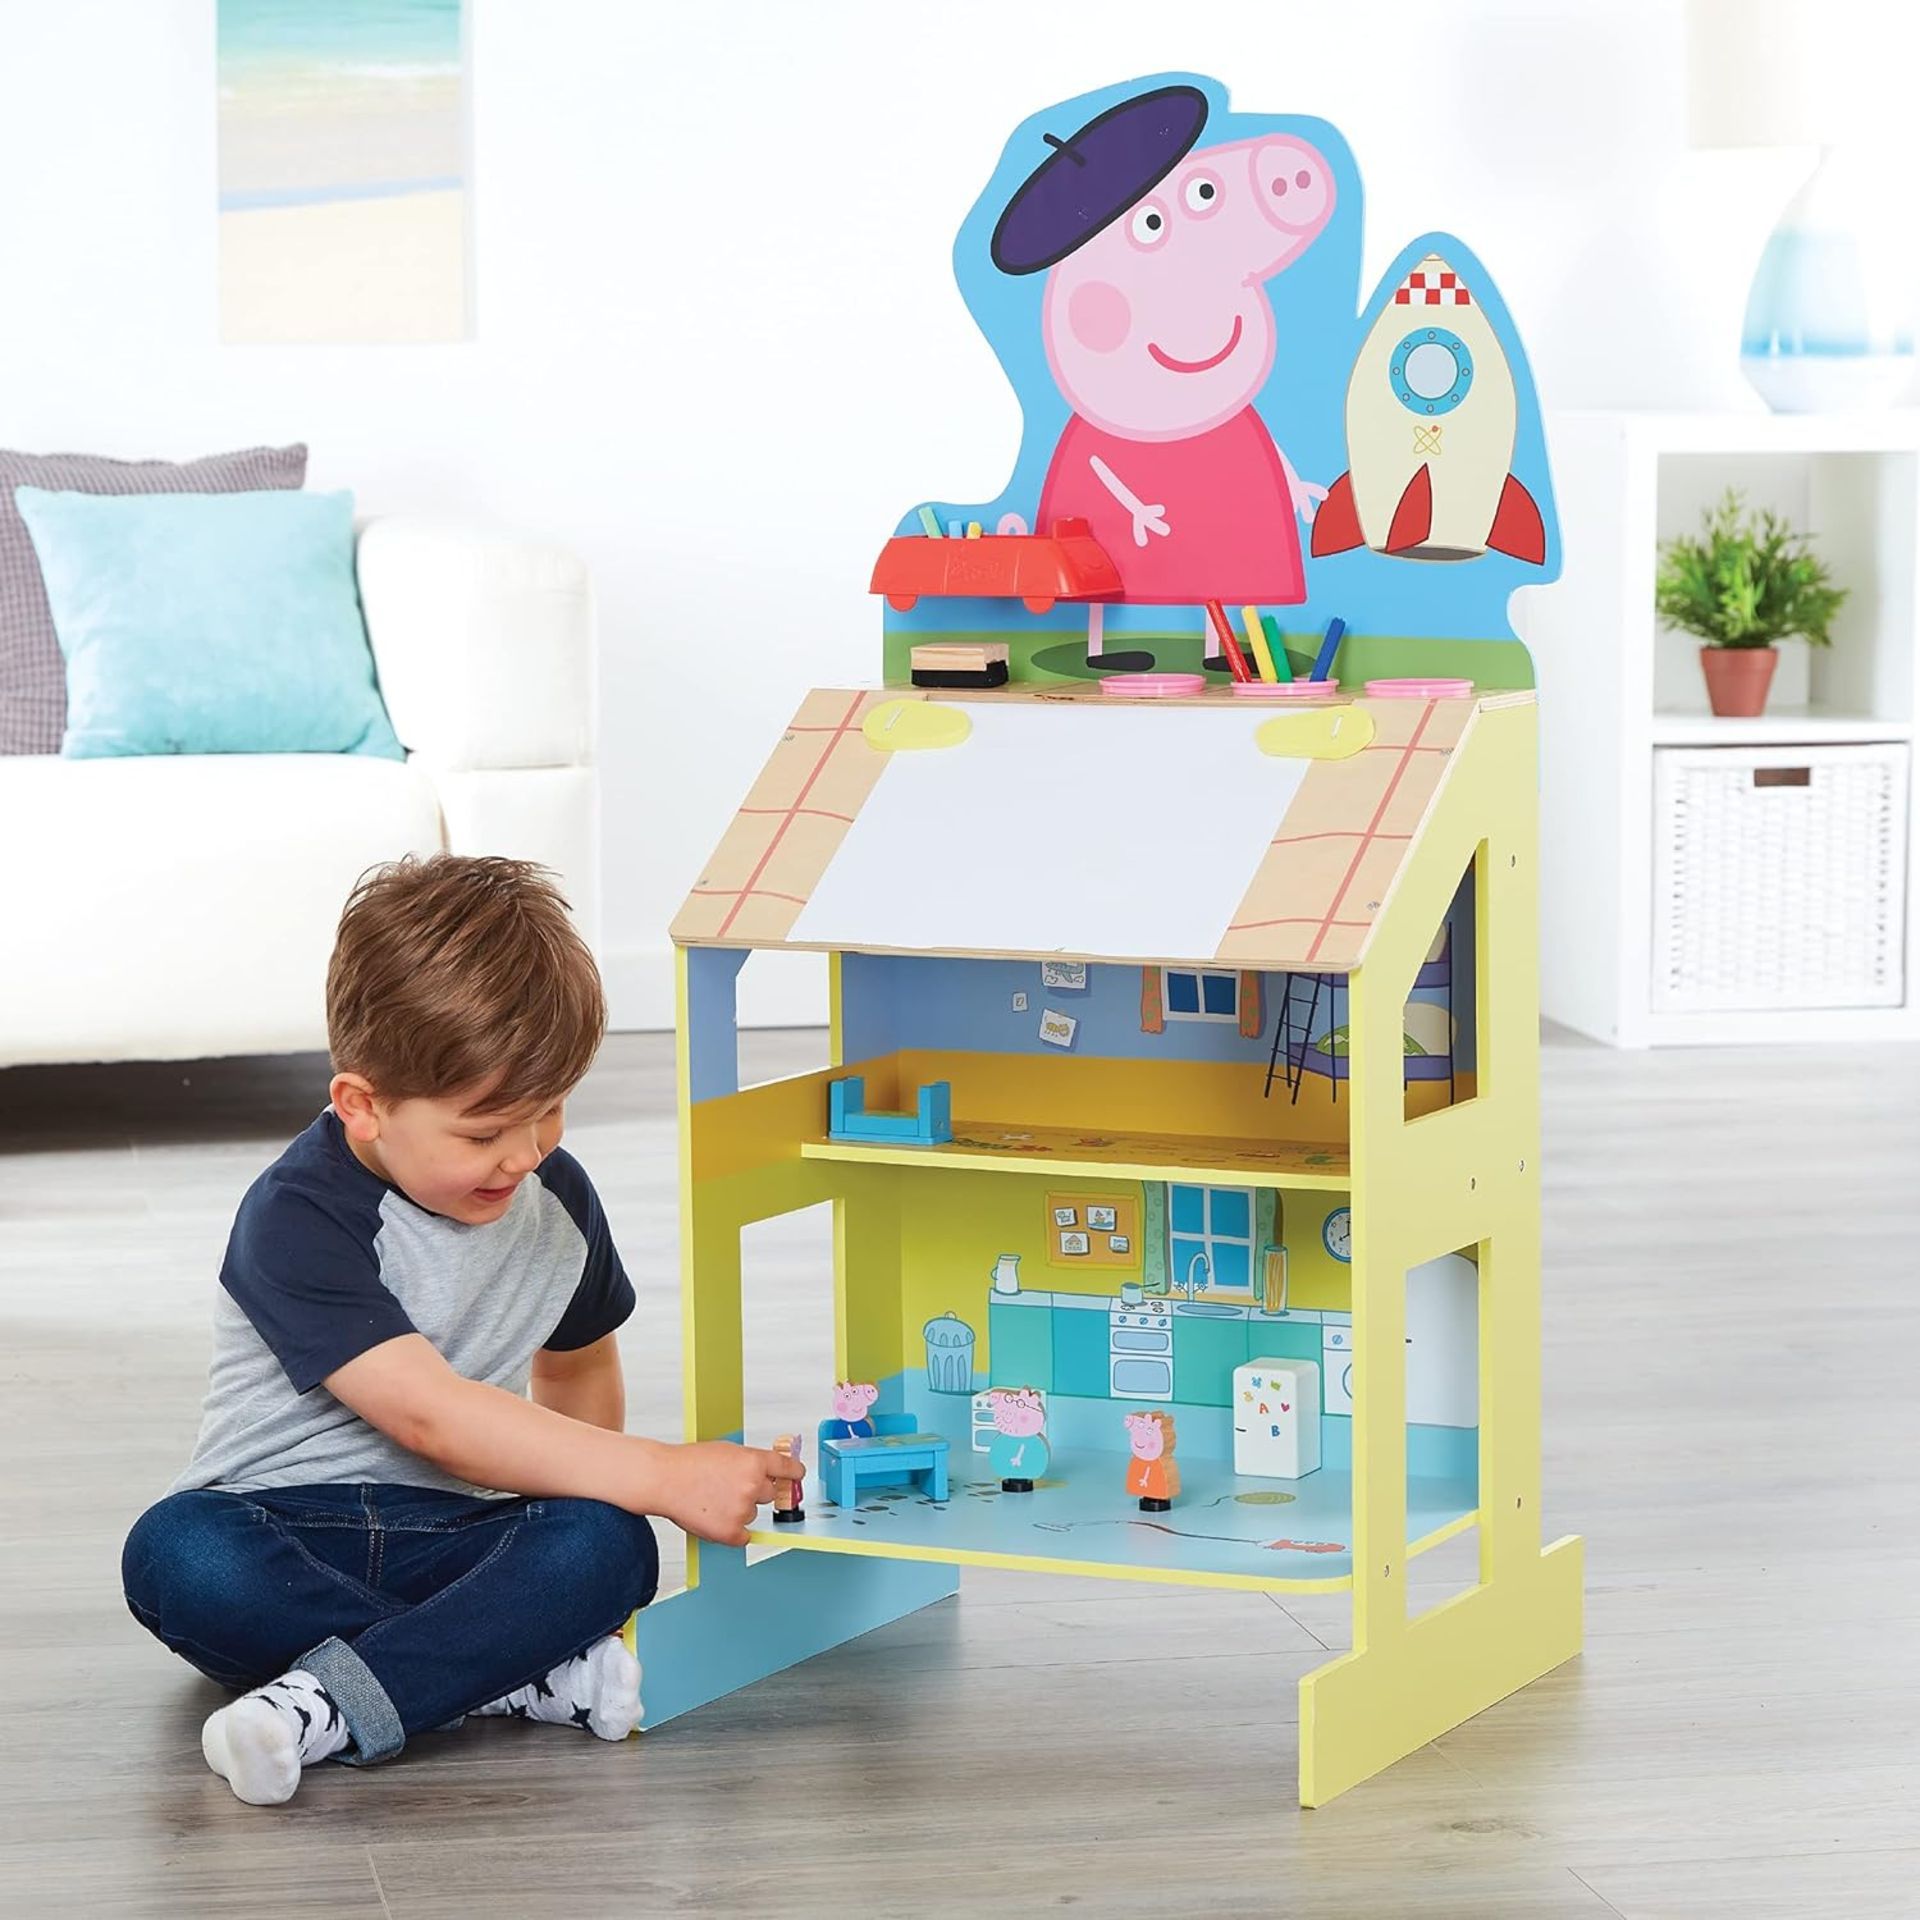 2x NEW & BOXED Peppa Pig Play & Draw Wooden Easel. RRP £69.99 EACH. Peppa's Wooden Play Easel is a - Image 4 of 4